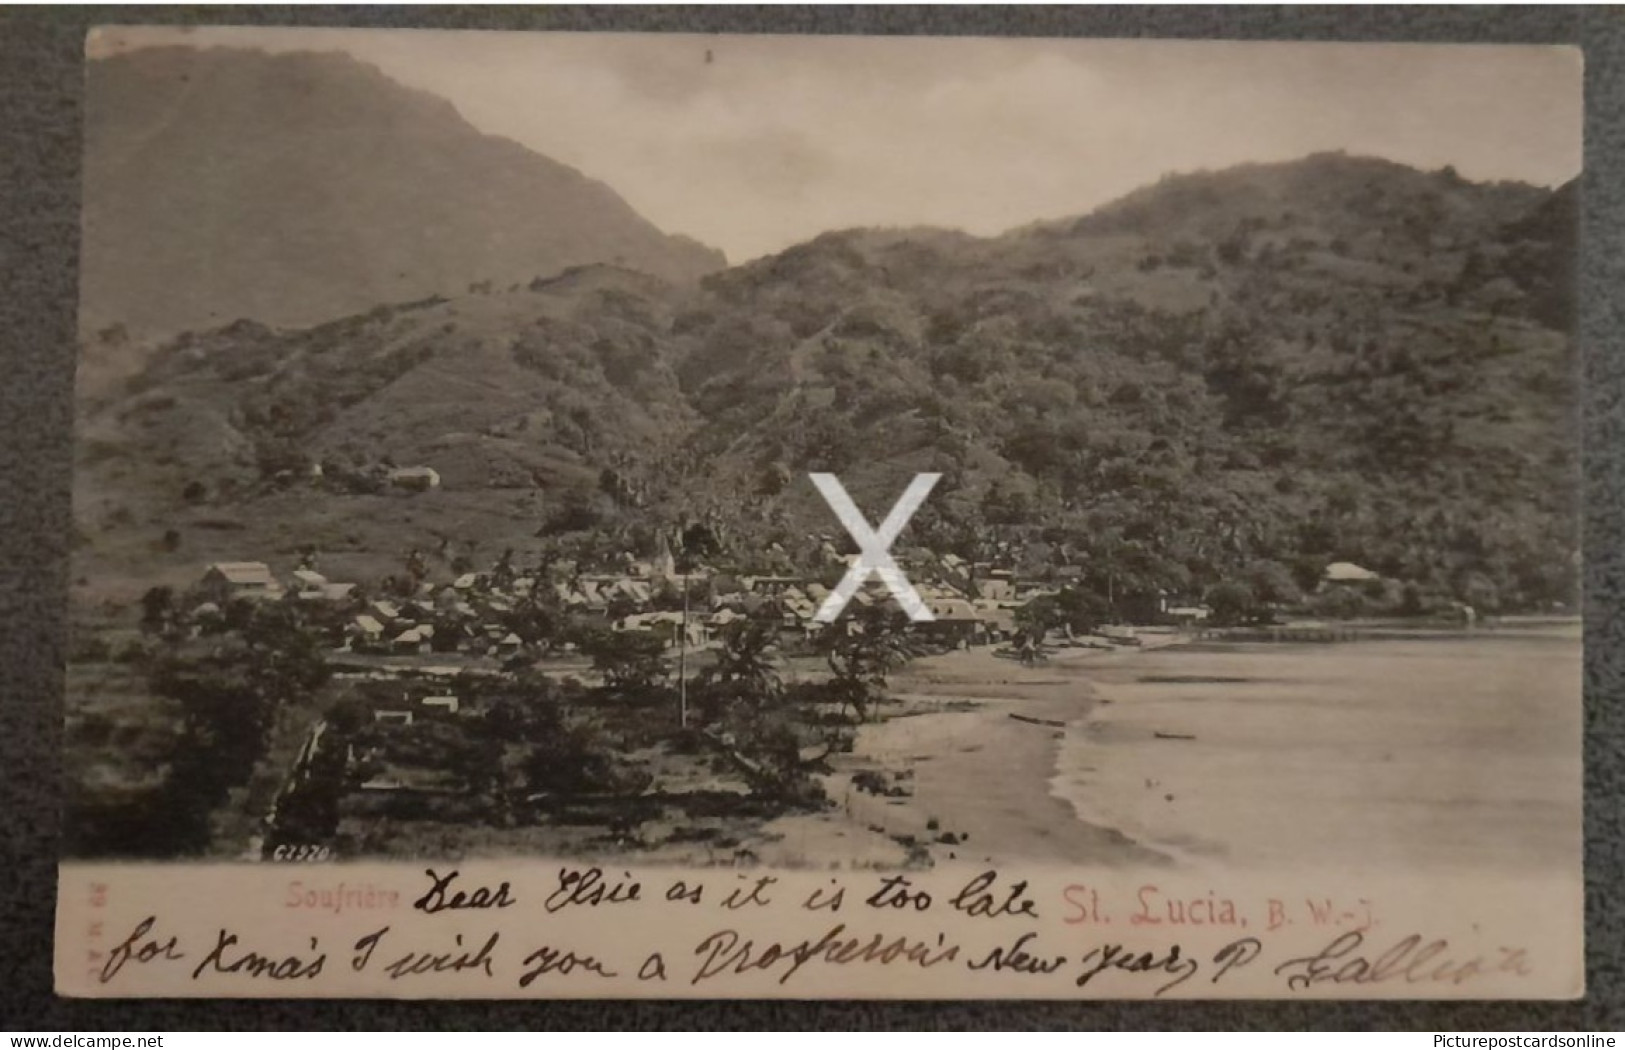 ST LUCIA SOUFRIERE NICE OLD B/W POSTCARD ANTILLES AMERICA POSTED TO GUERNSEY - Saint Lucia